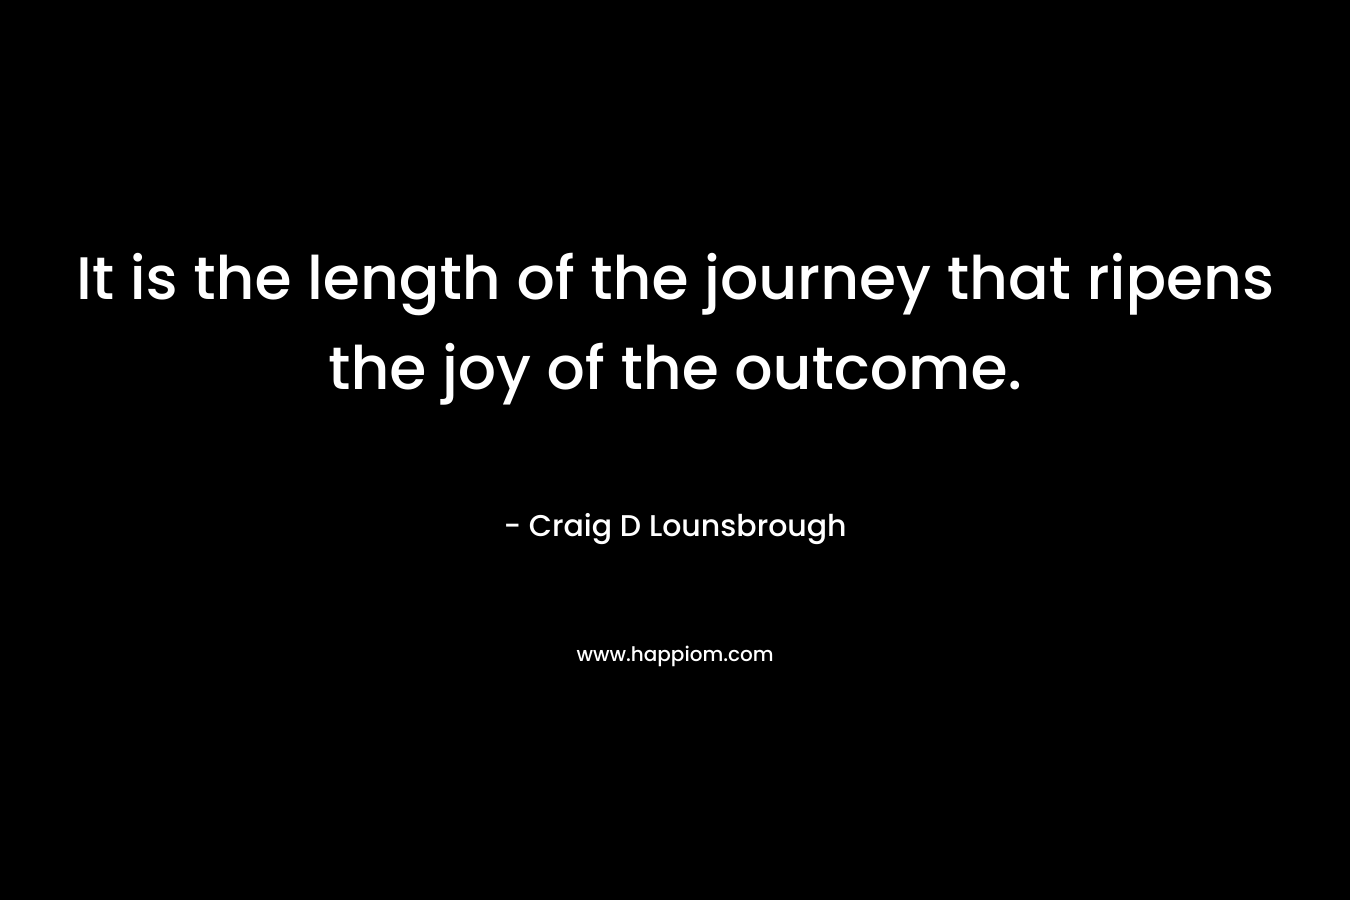 It is the length of the journey that ripens the joy of the outcome.